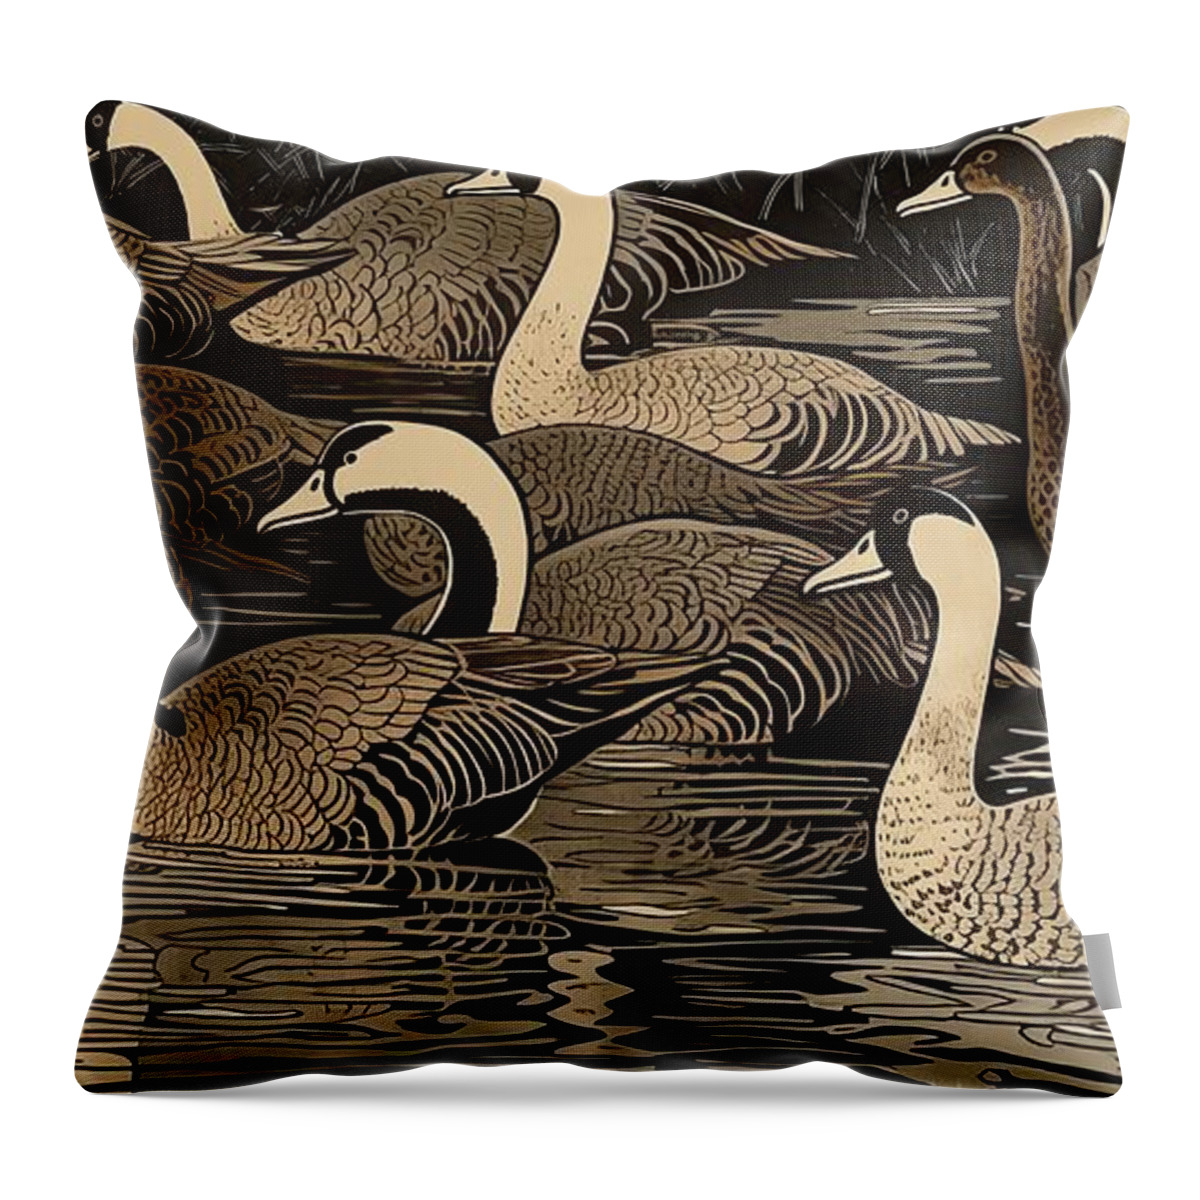 Swans Throw Pillow featuring the painting Swan Symphony by Mindy Sommers